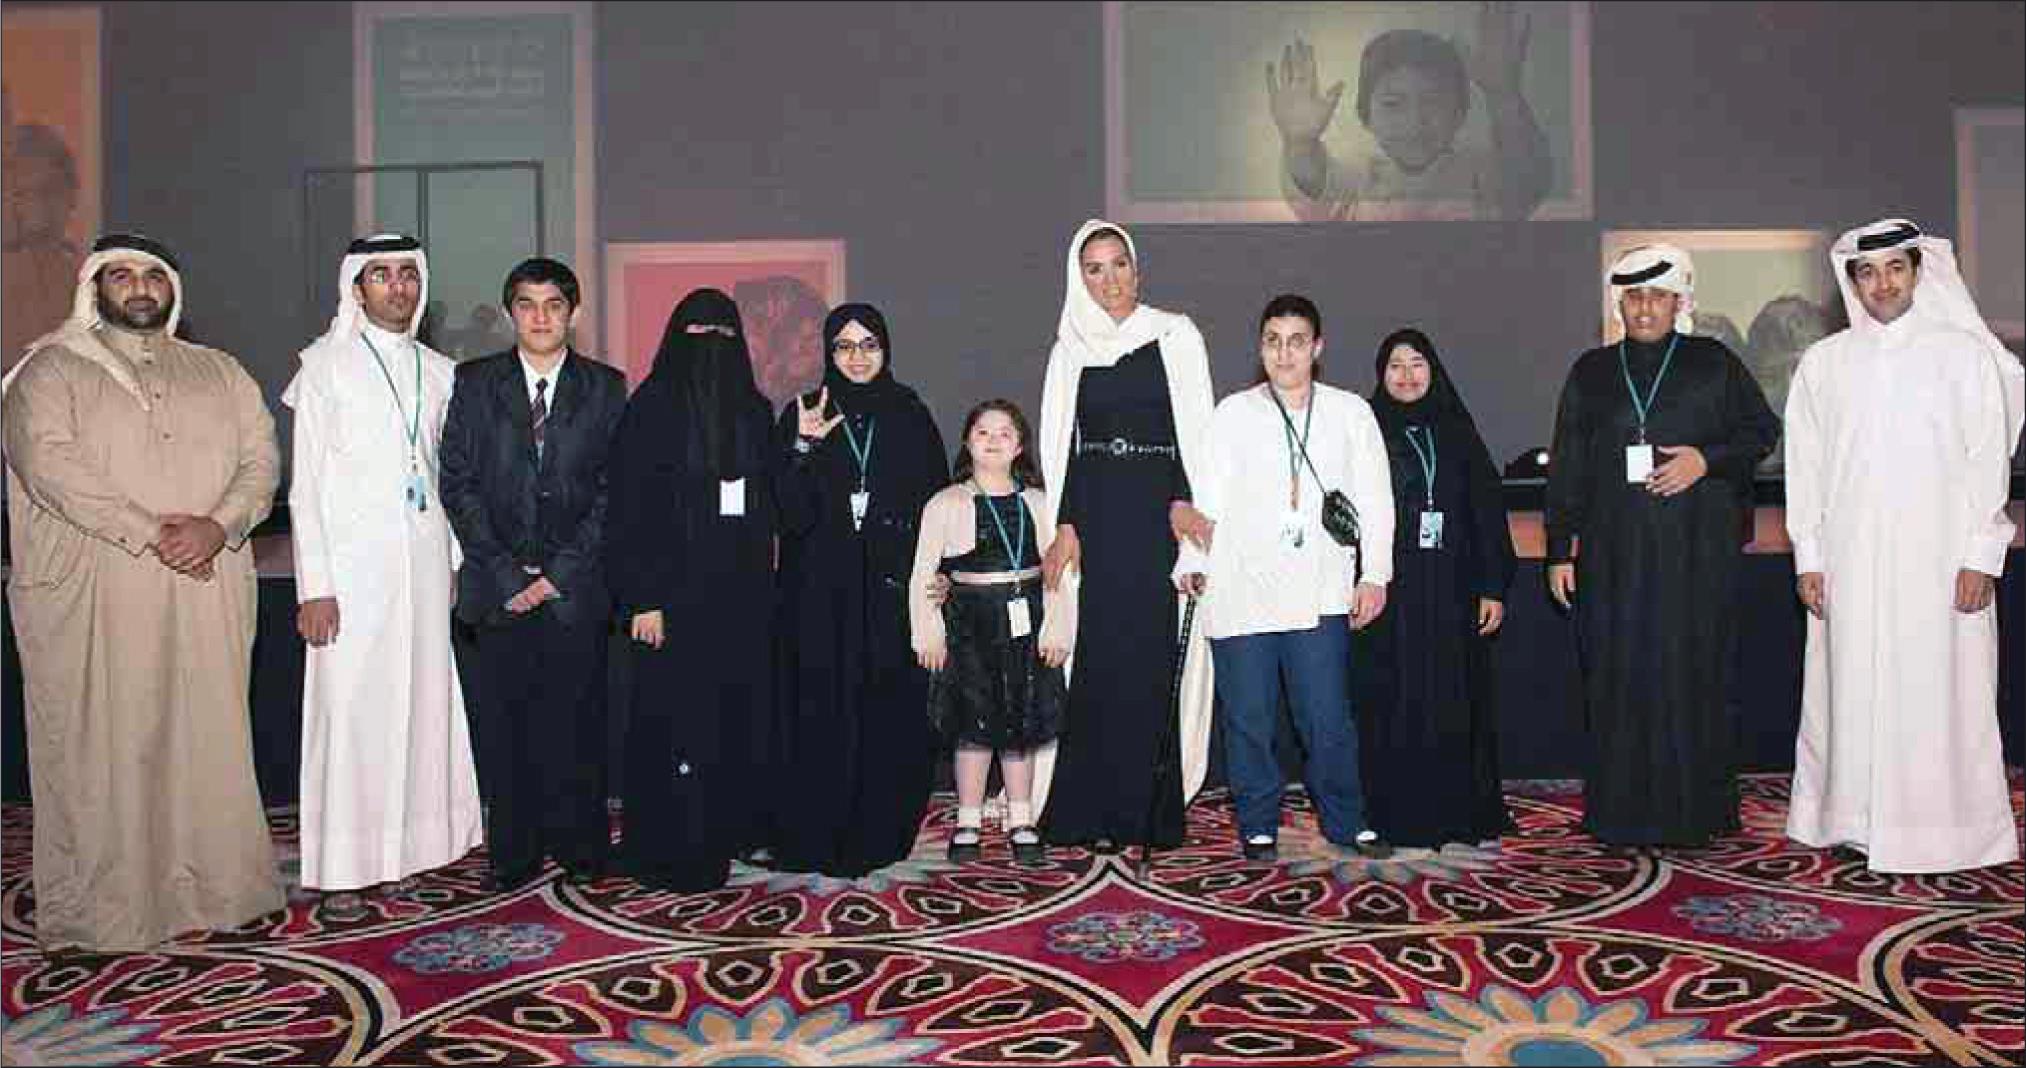 With HH Sheikha Moza Bint Nasser first lady of Qatar and a group of special needs children in the ROTA Gala Dinner